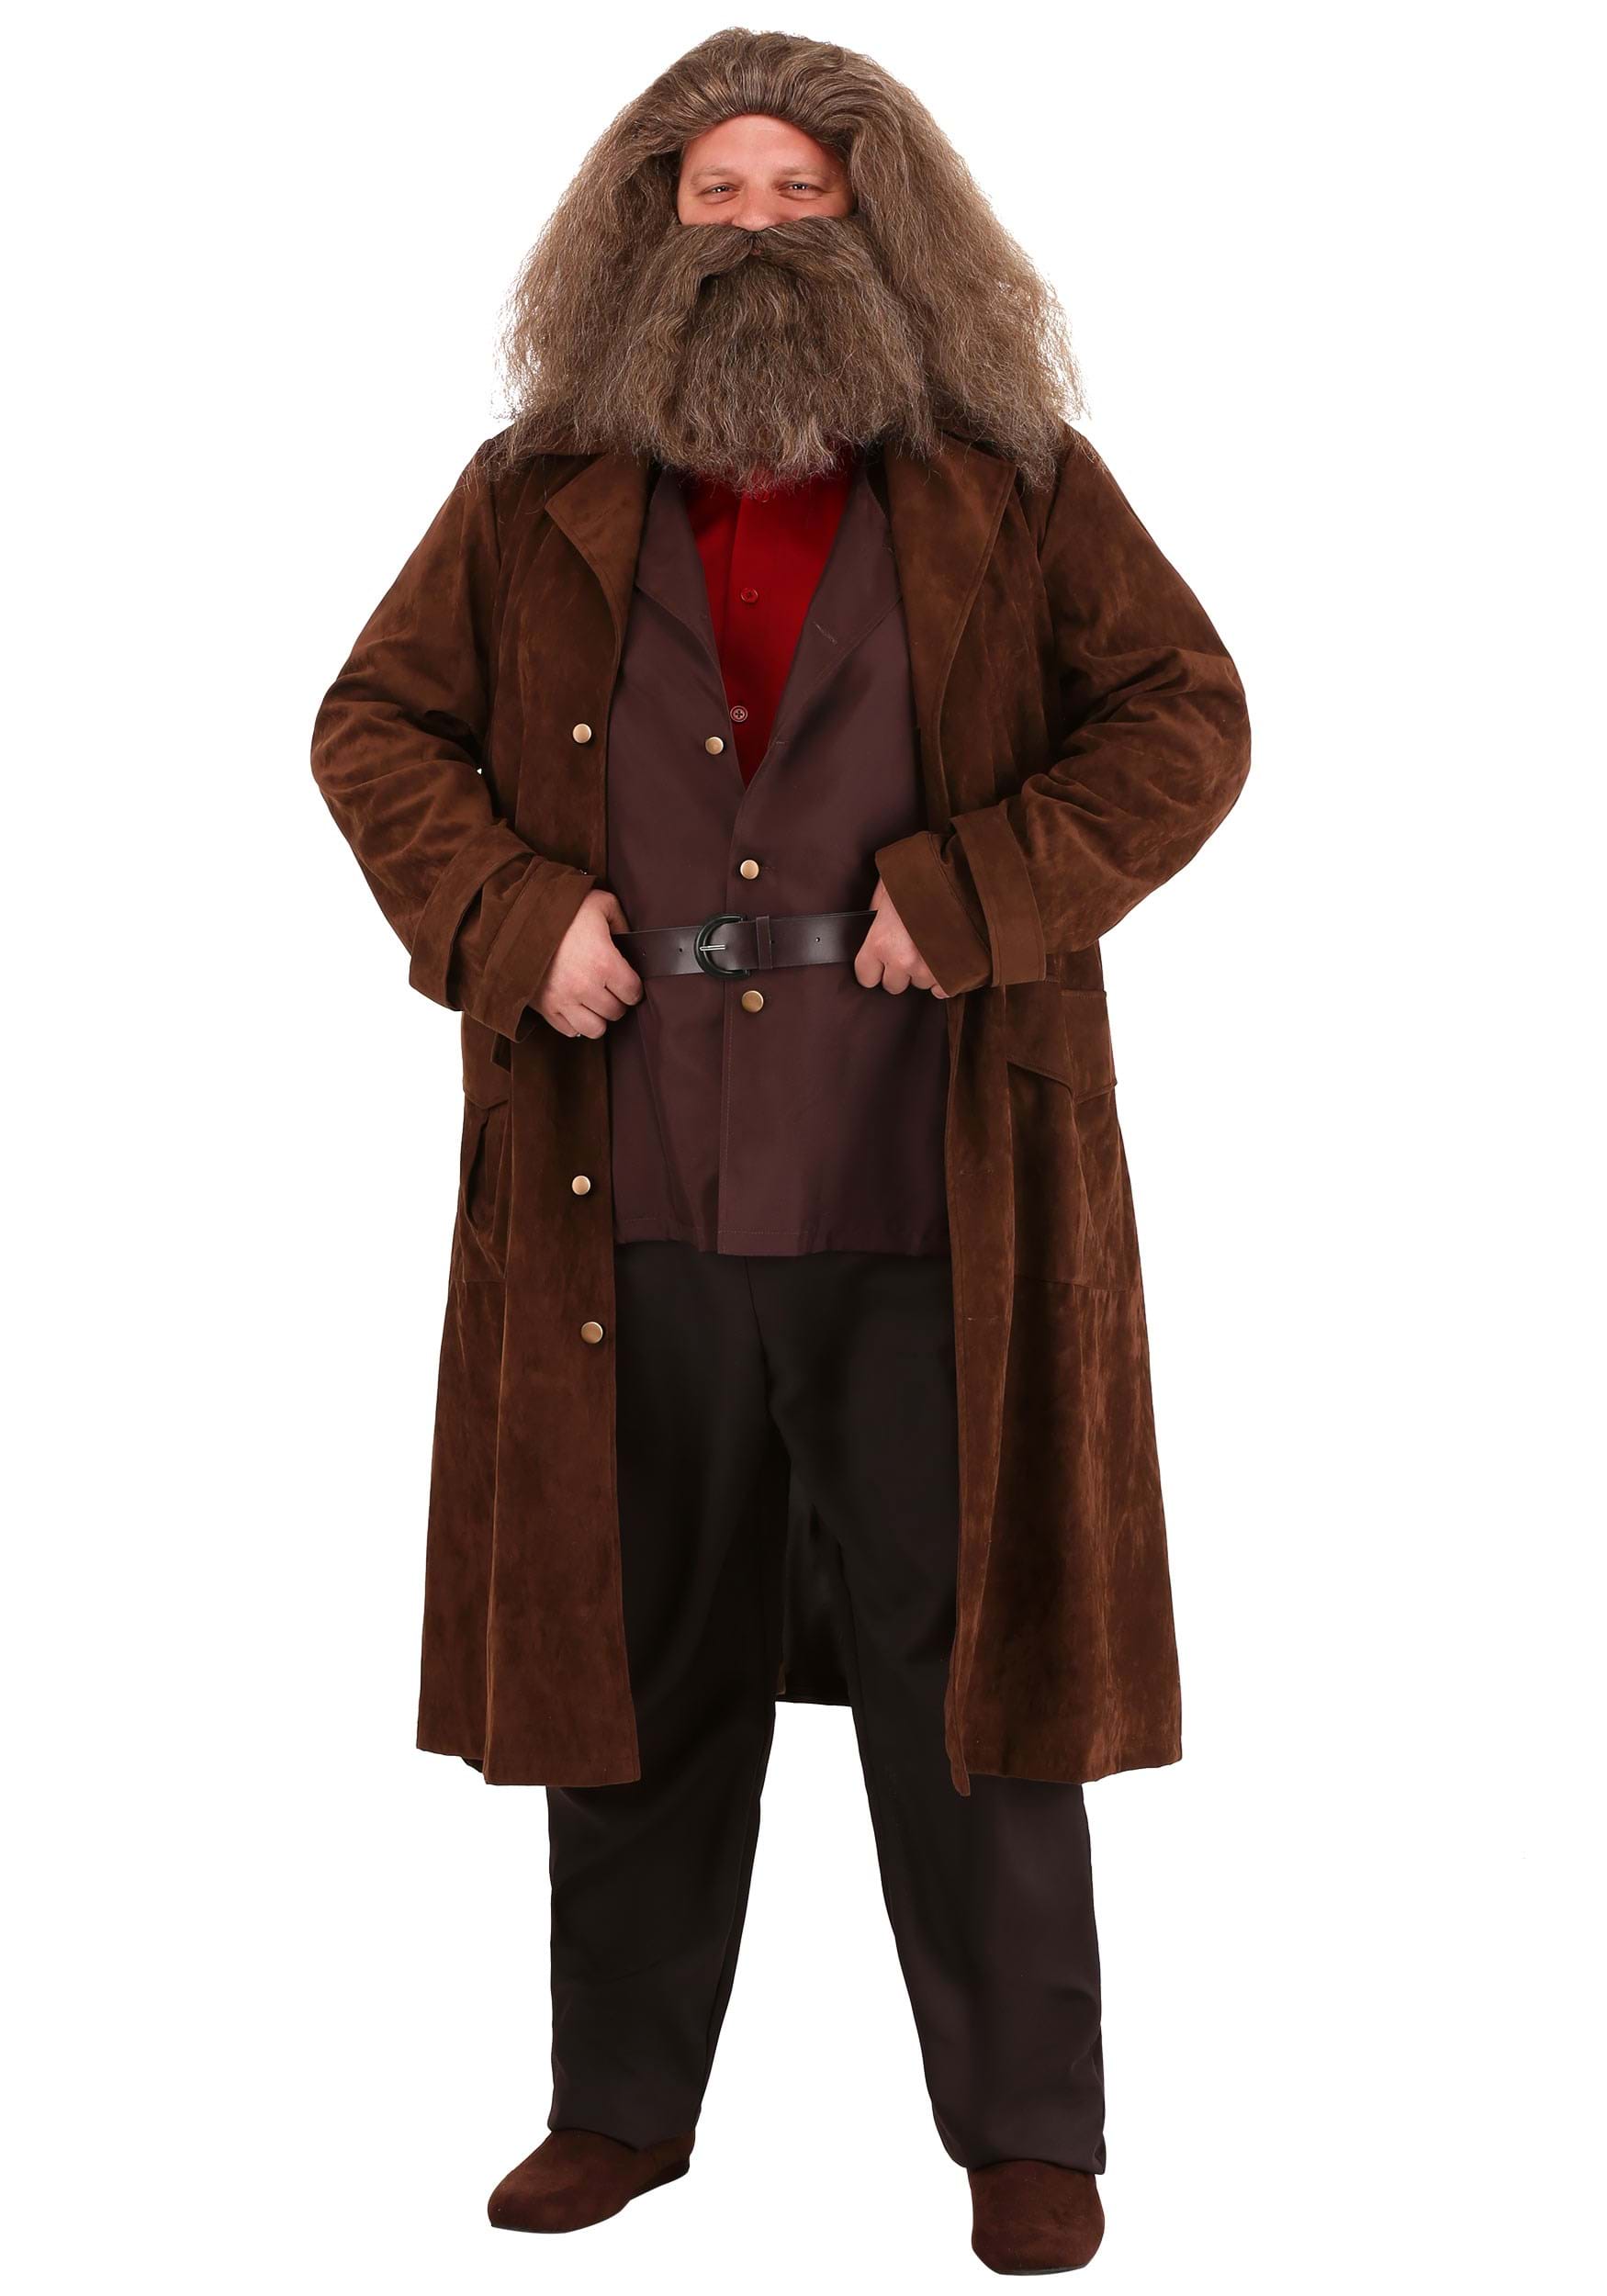 Image of Deluxe Men's Harry Potter Hagrid Costume ID FUN1439AD-S